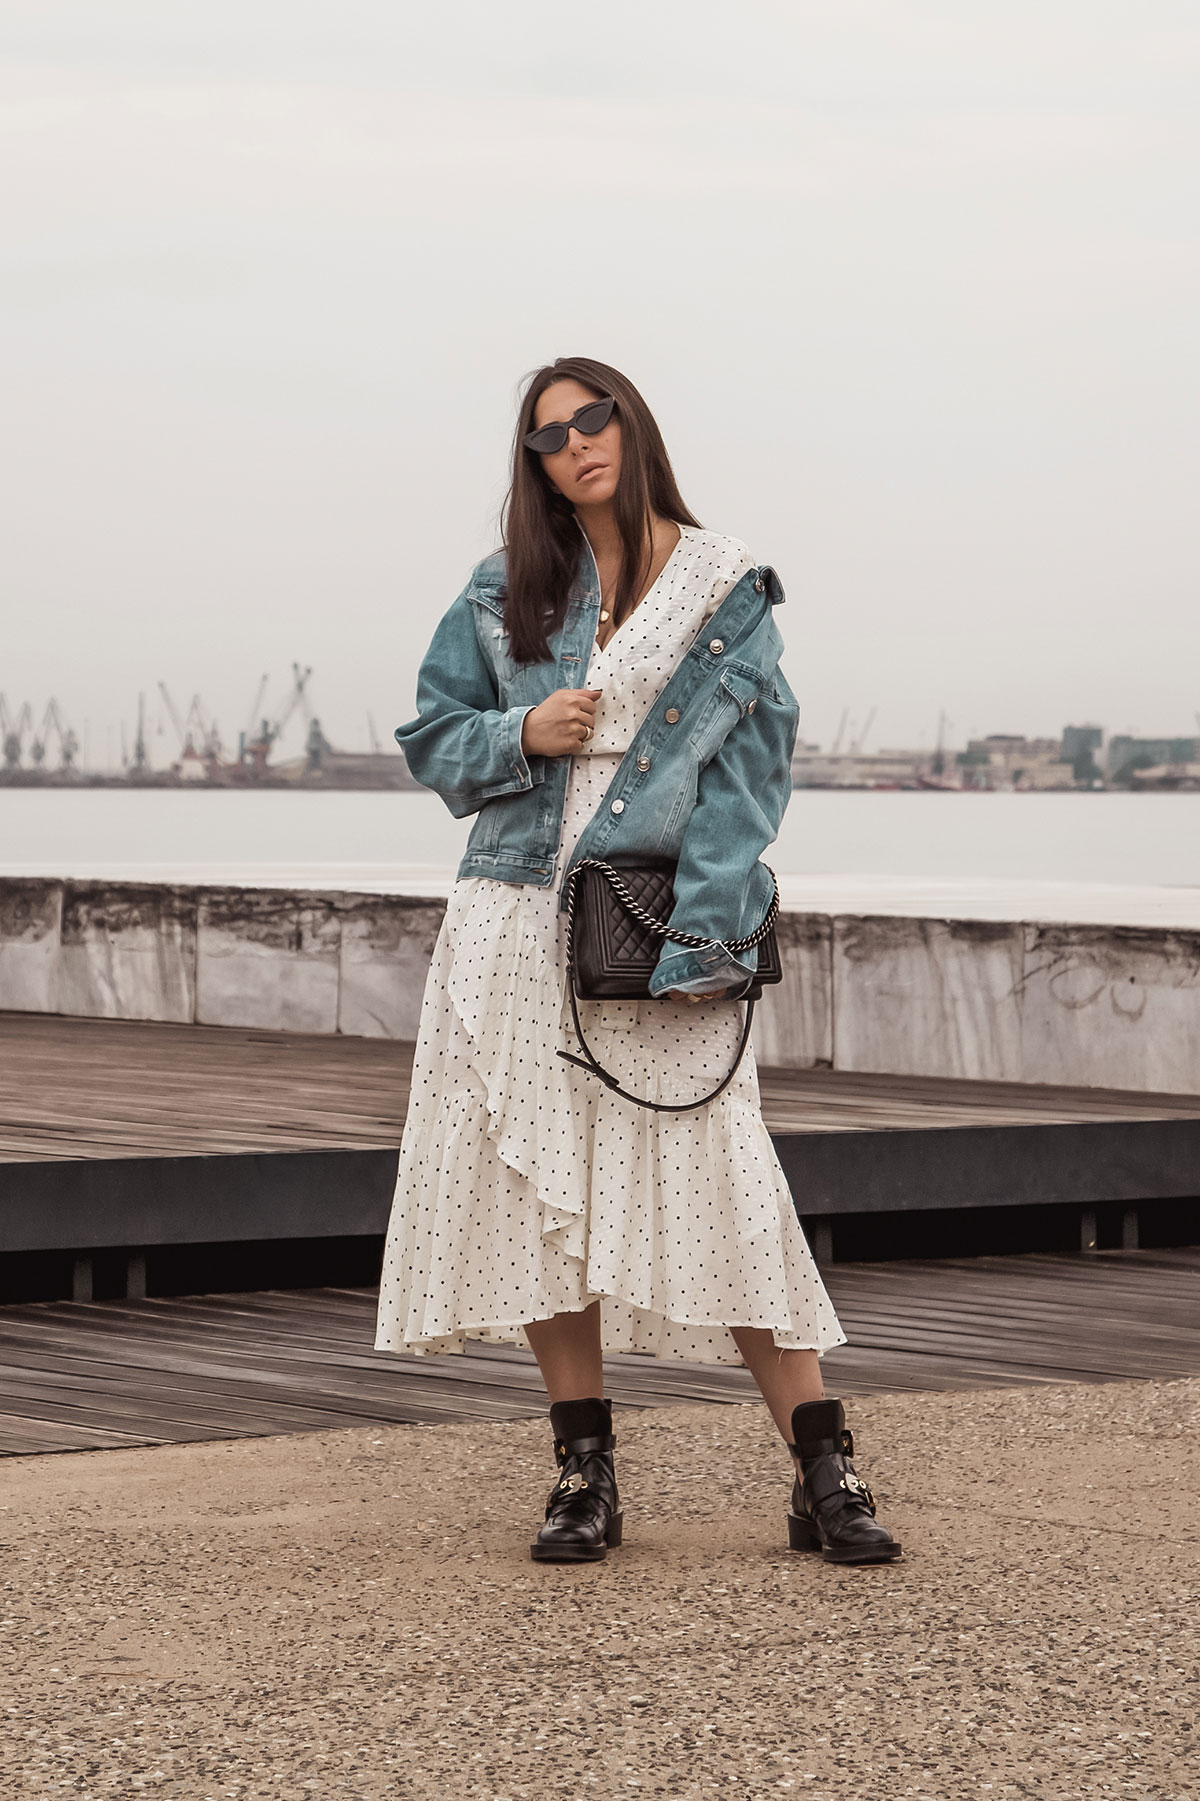 polka dot dress with edgy boots and denim jacket by Stella Asteria - Fashion & Lifestyle Blogger